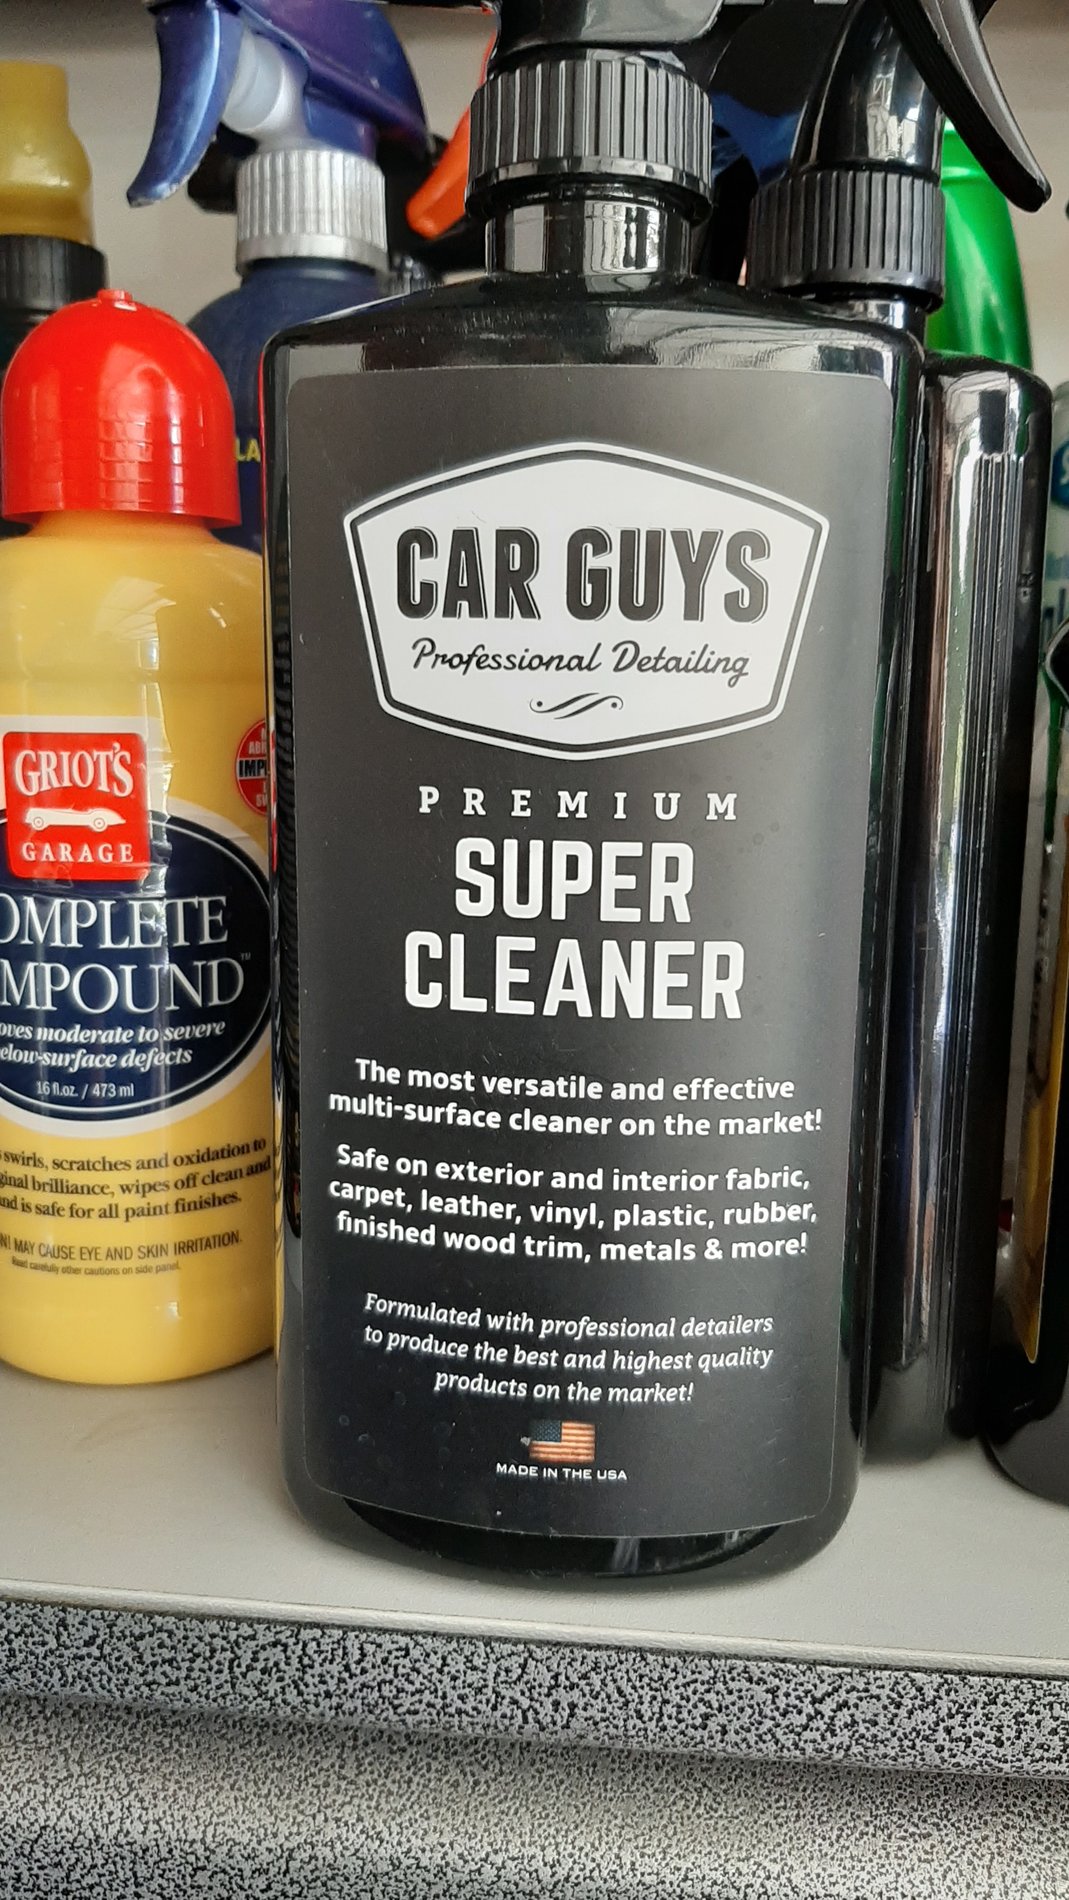 Car Guys Super Cleaner cleaning clothe seats 